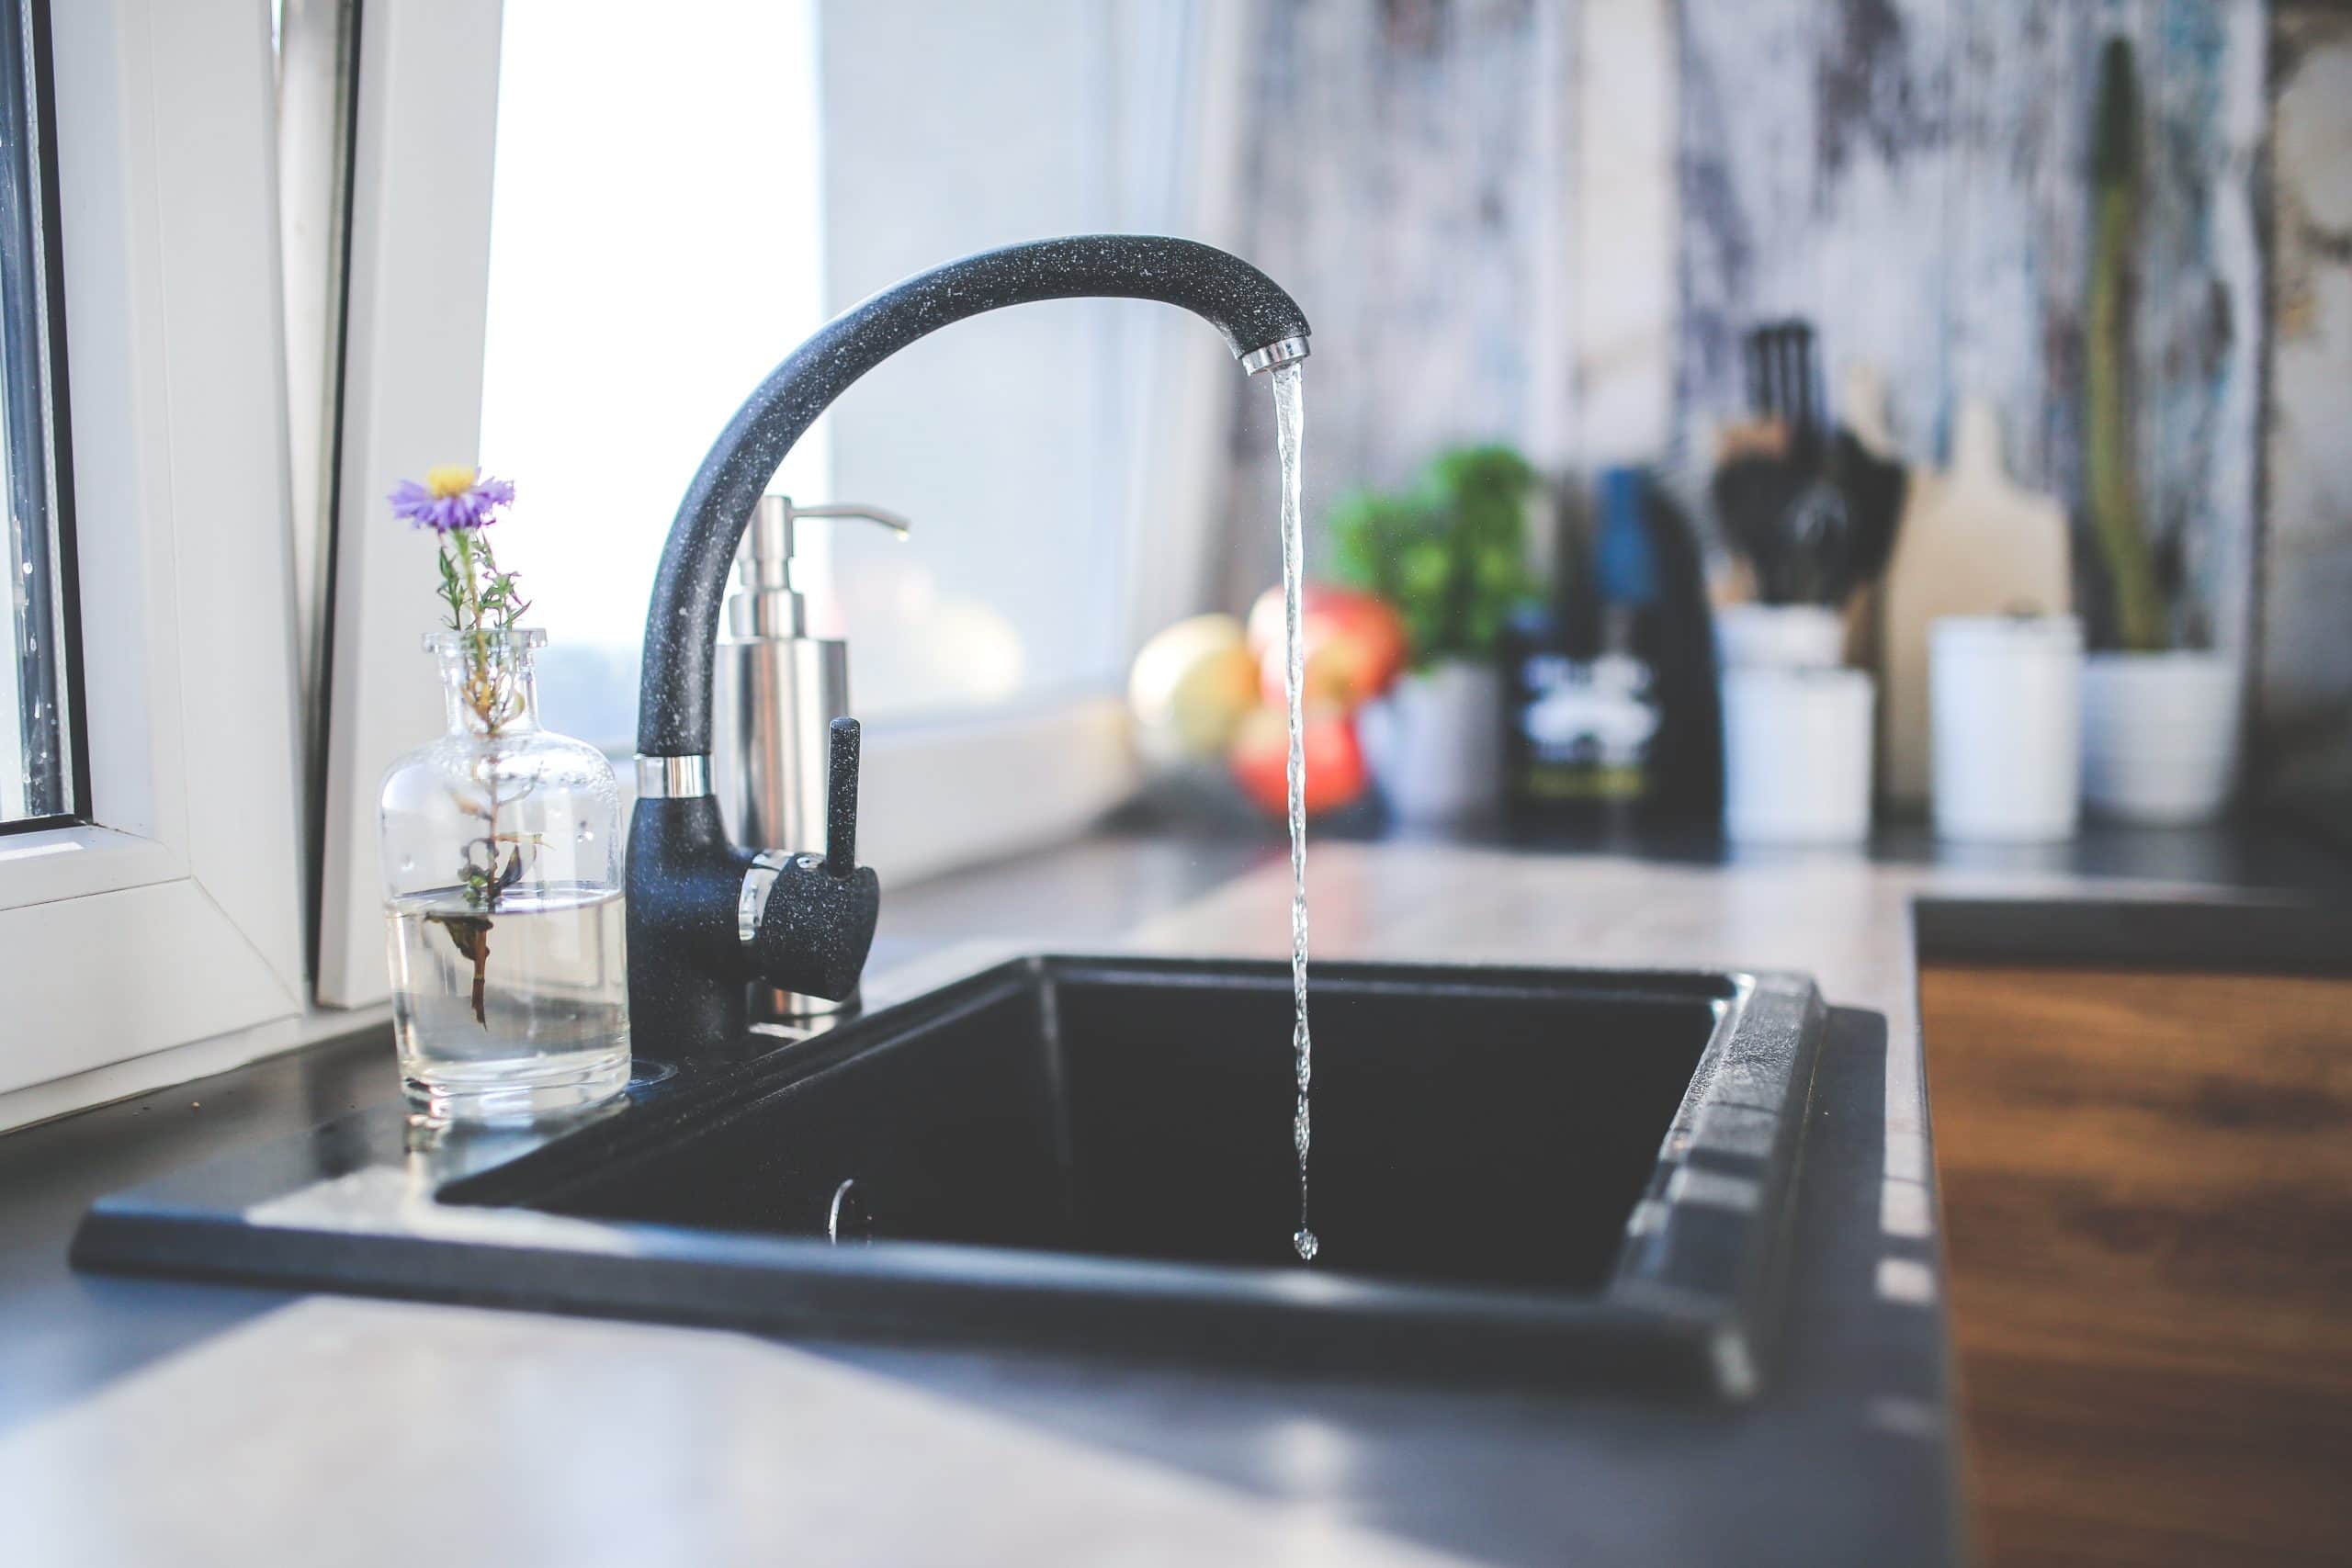 Replacing a sink – what to consider?